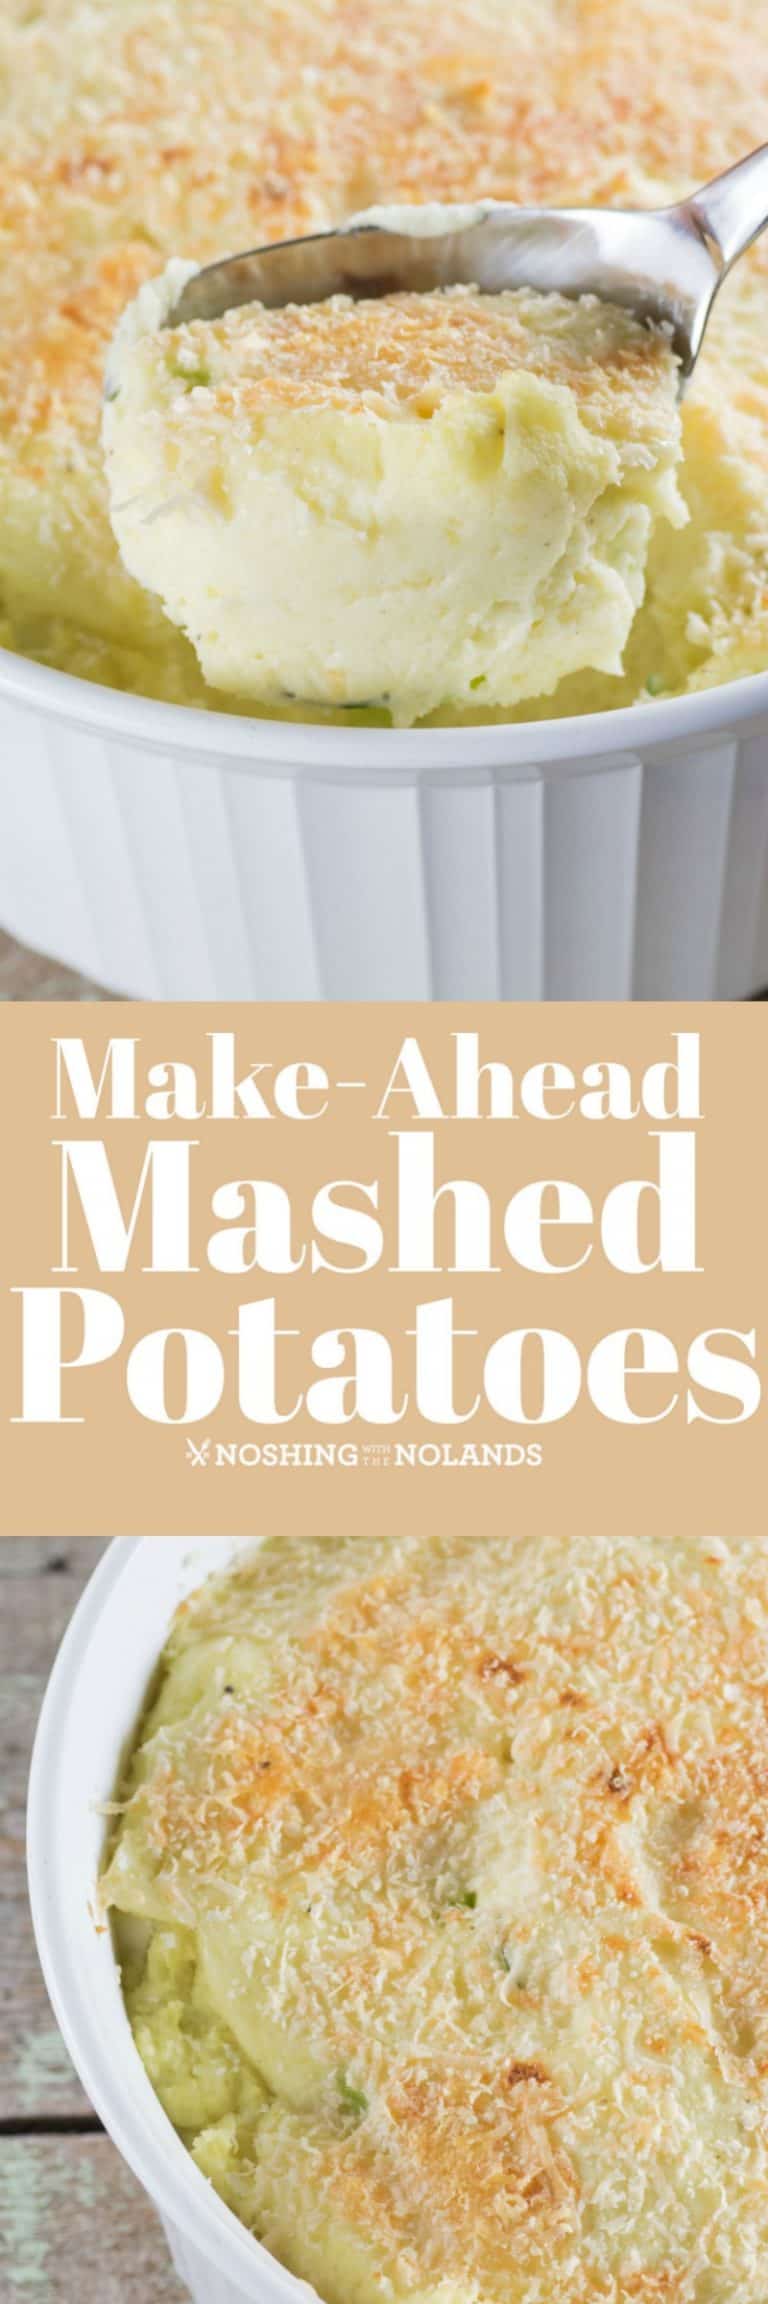 Make-Ahead Mashed Potatoes Recipe is the perfect dish for the holidays